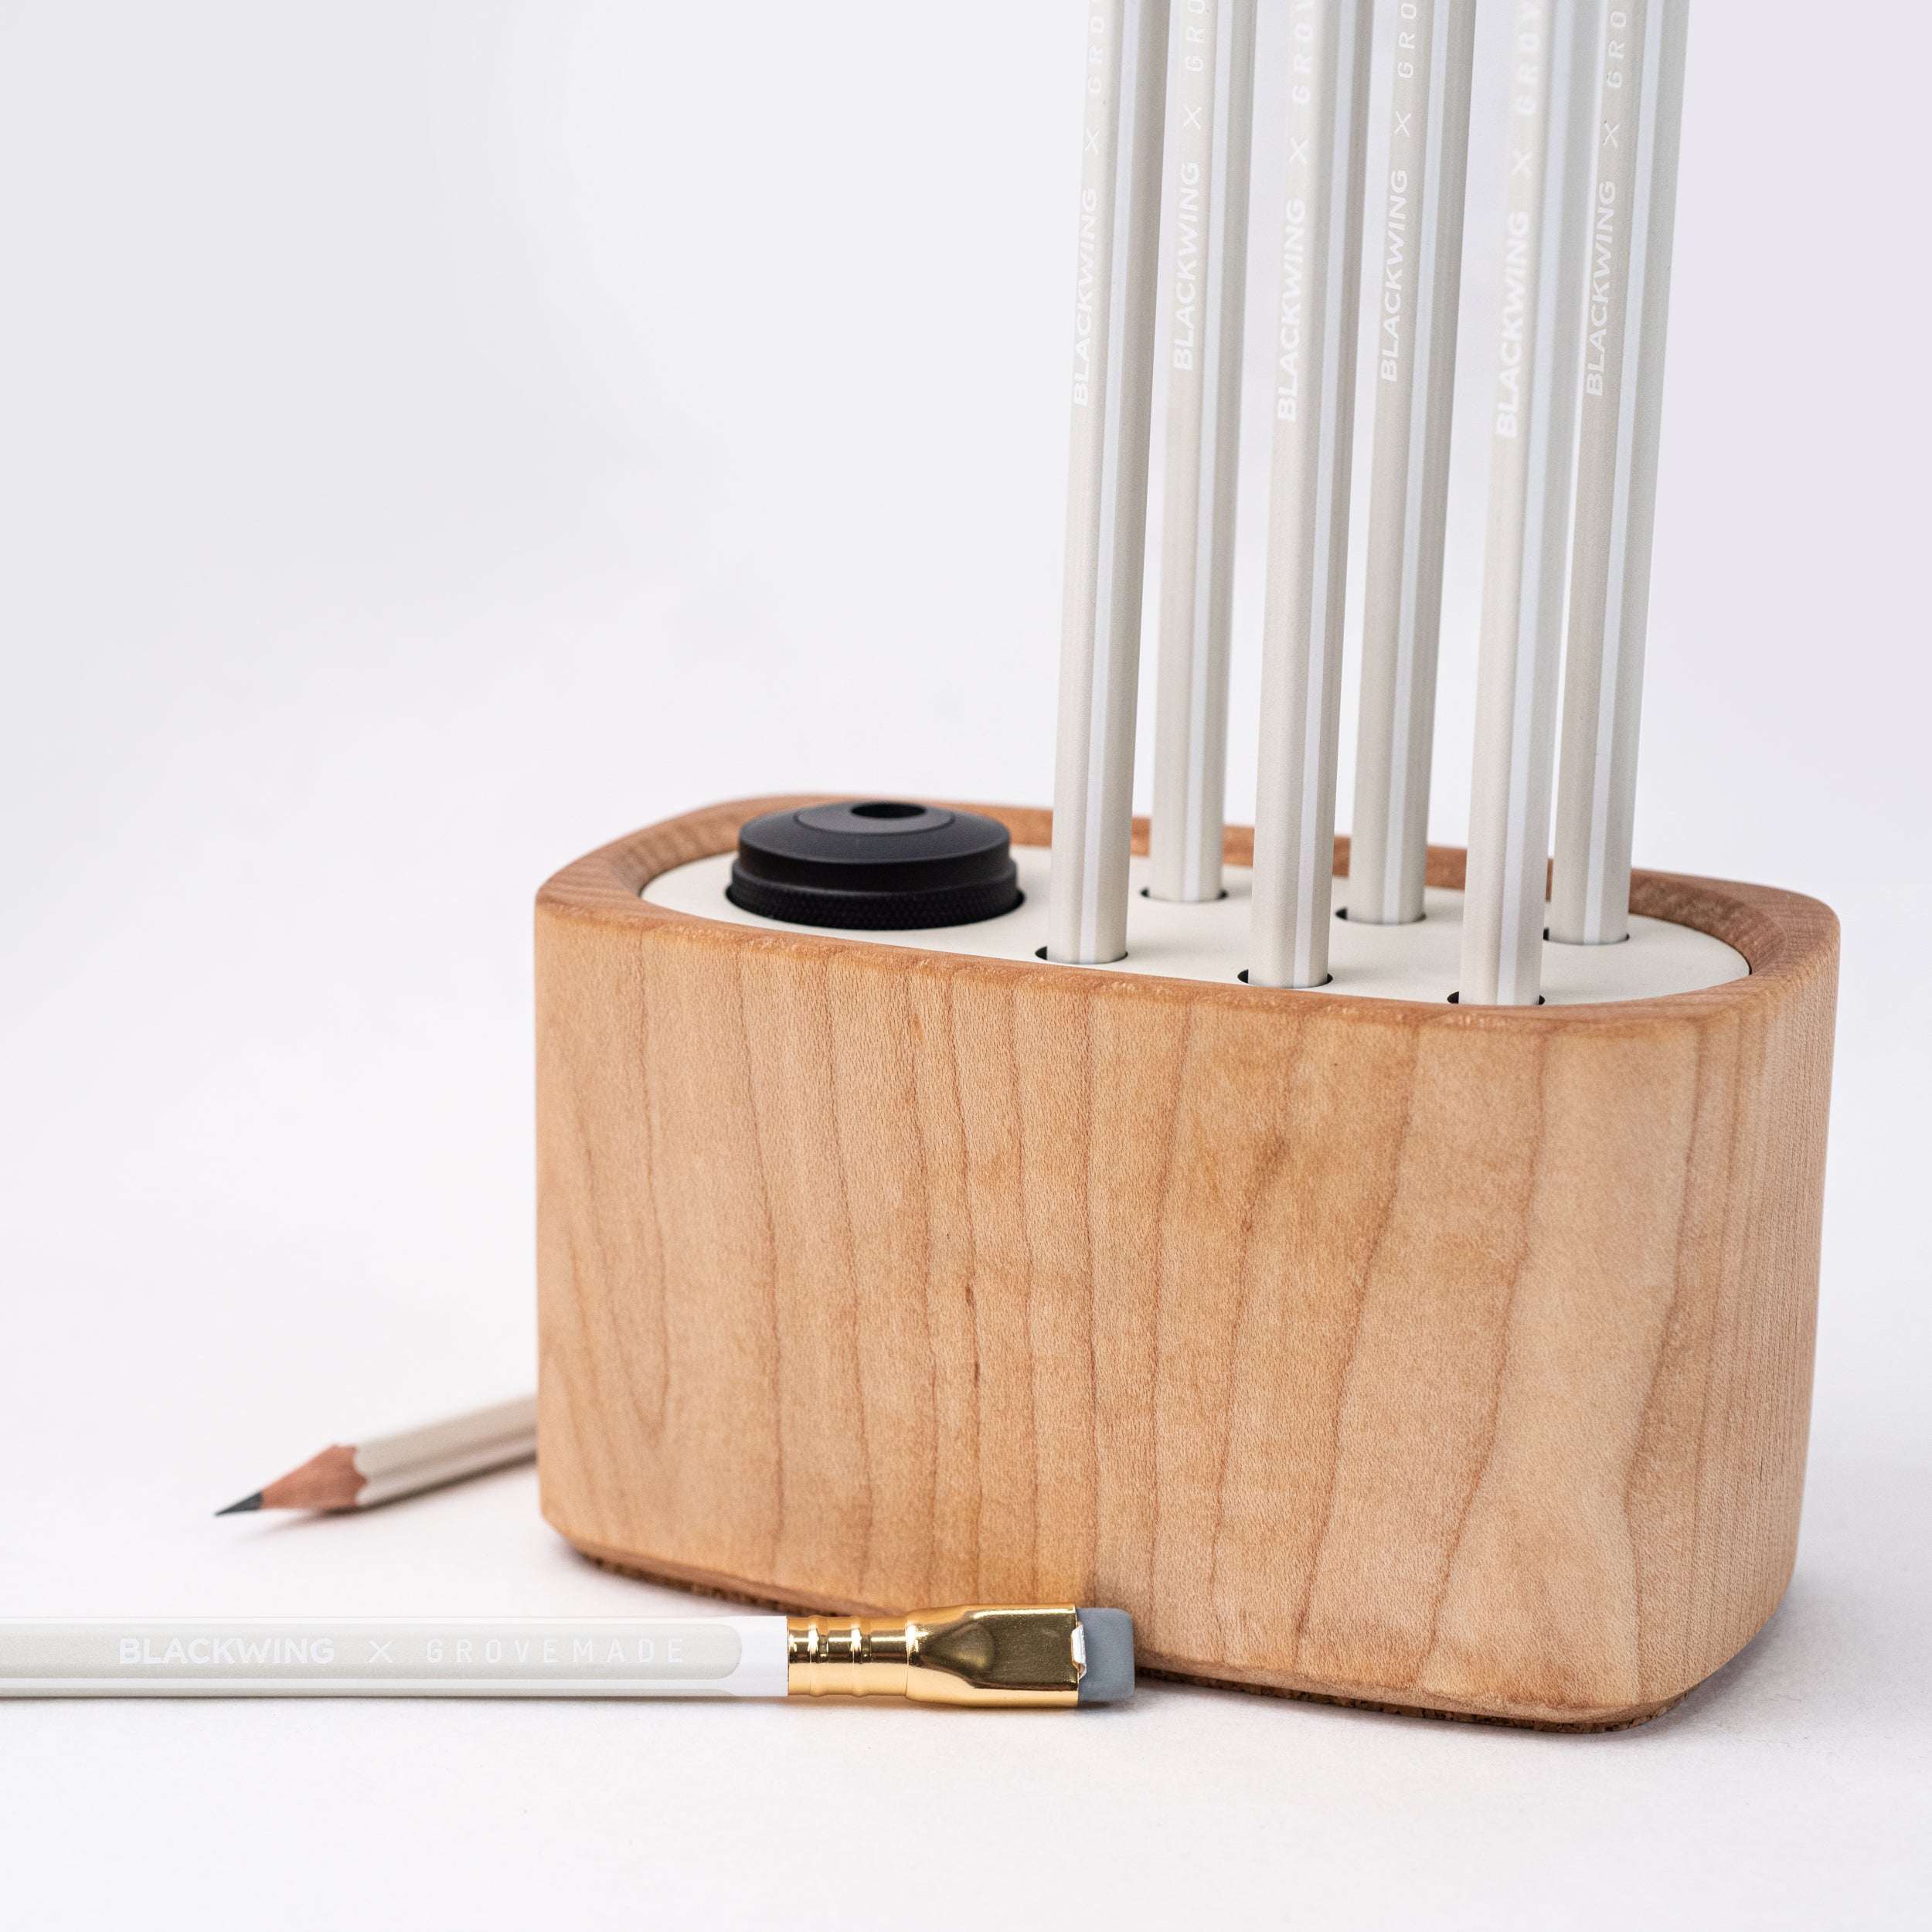 A Blackwing x Grovemade Desktop Caddy Kit - Maple with pencils.